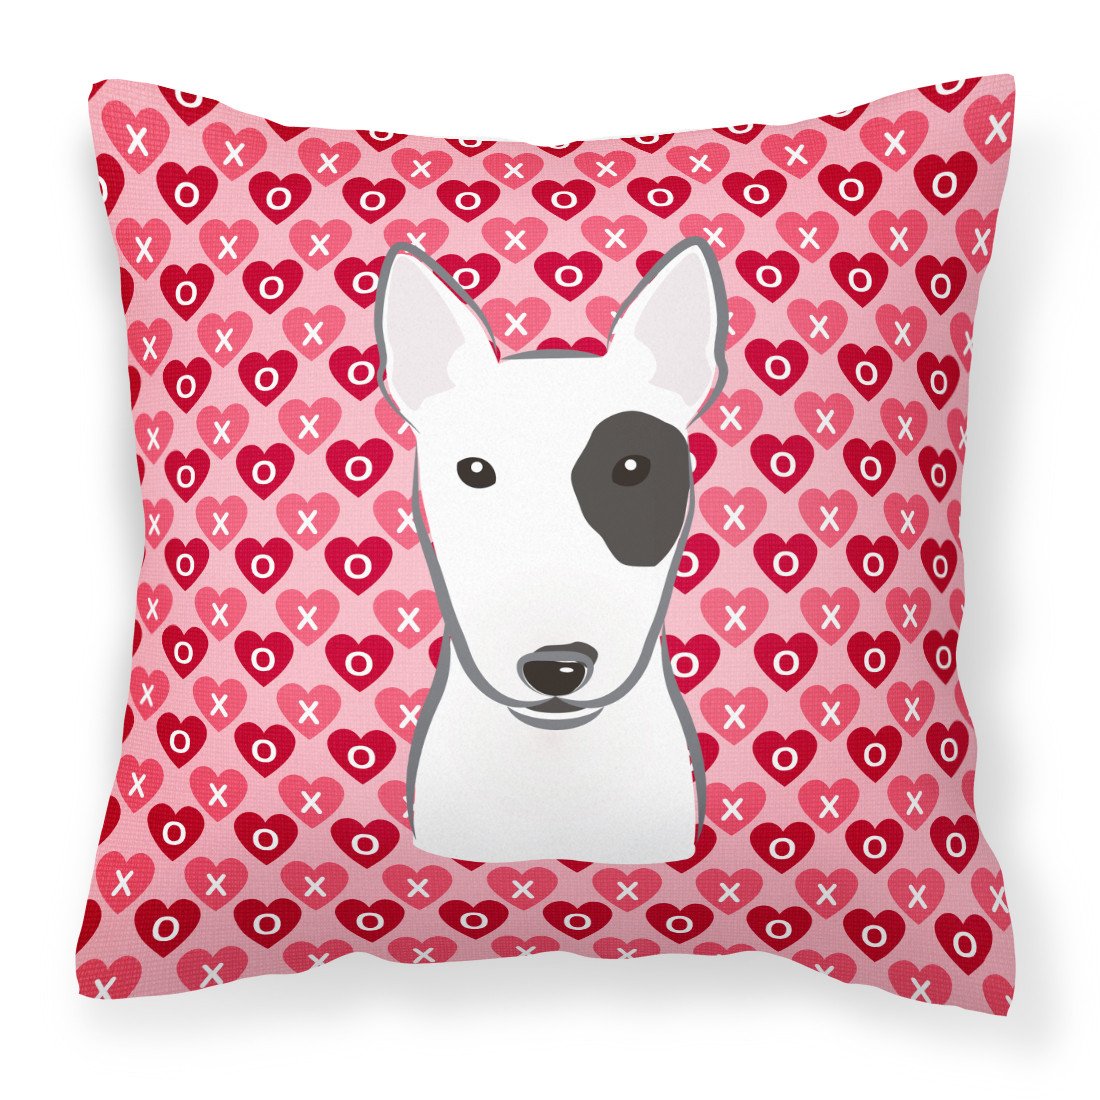 Bull Terrier Hearts Fabric Decorative Pillow BB5279PW1818 by Caroline's Treasures